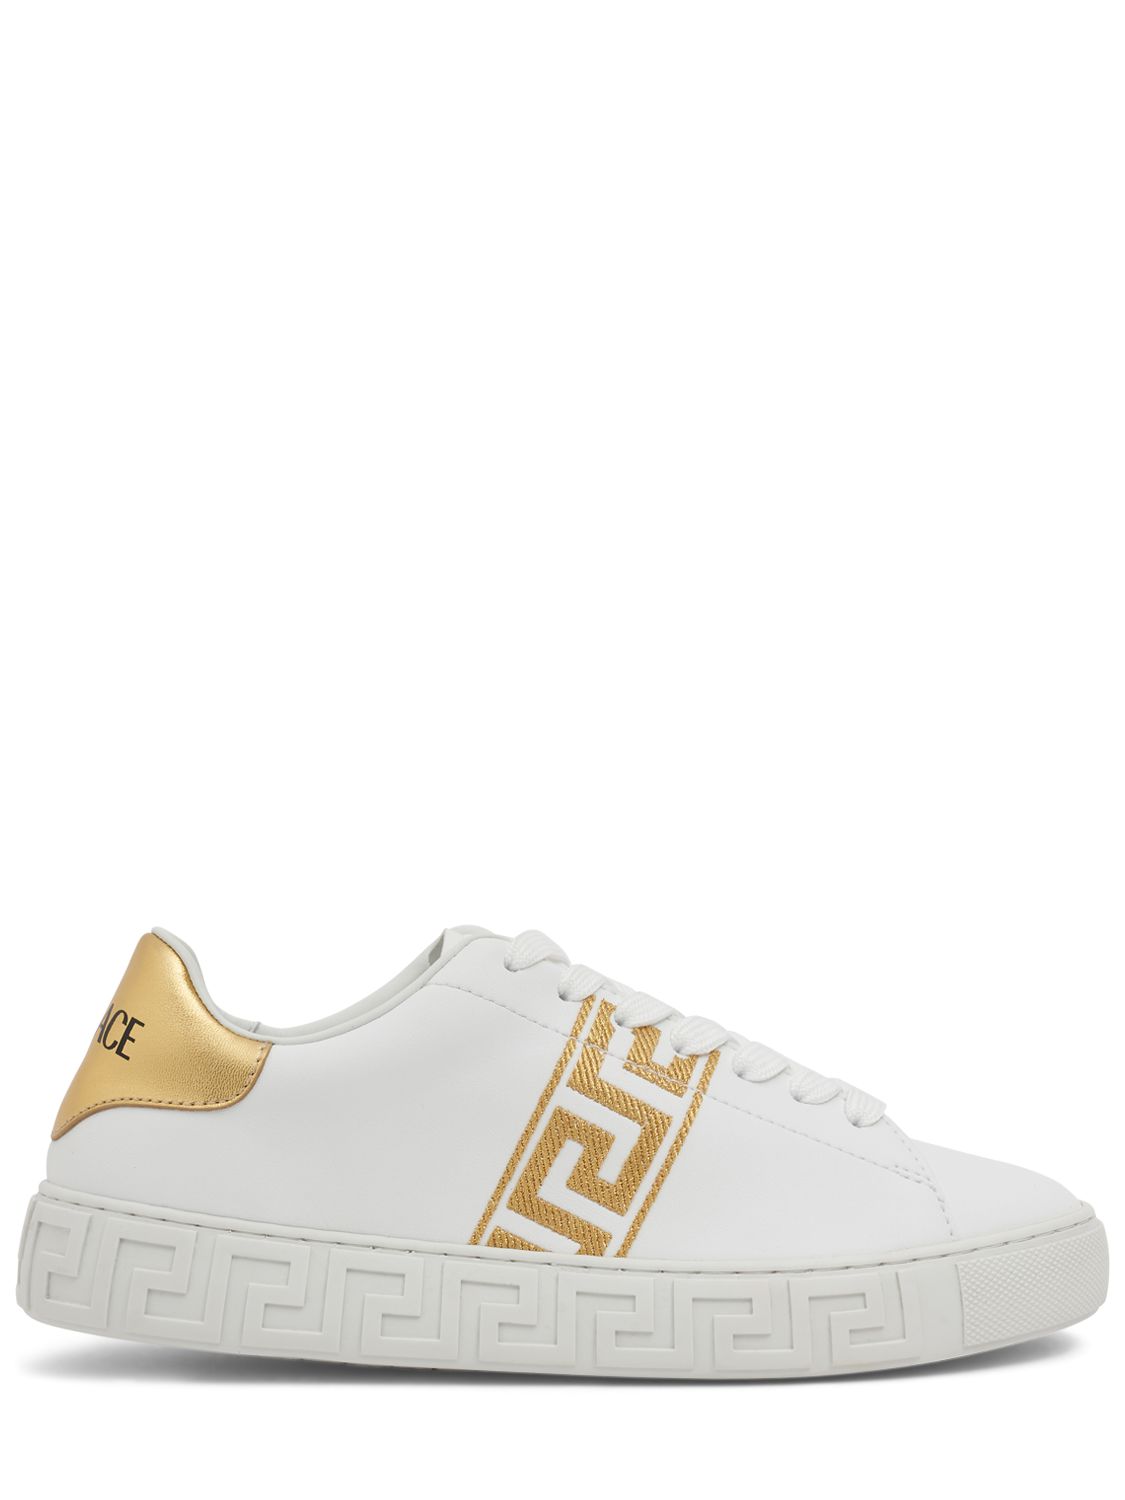 Faux Leather Sneakers W/ Embroidery